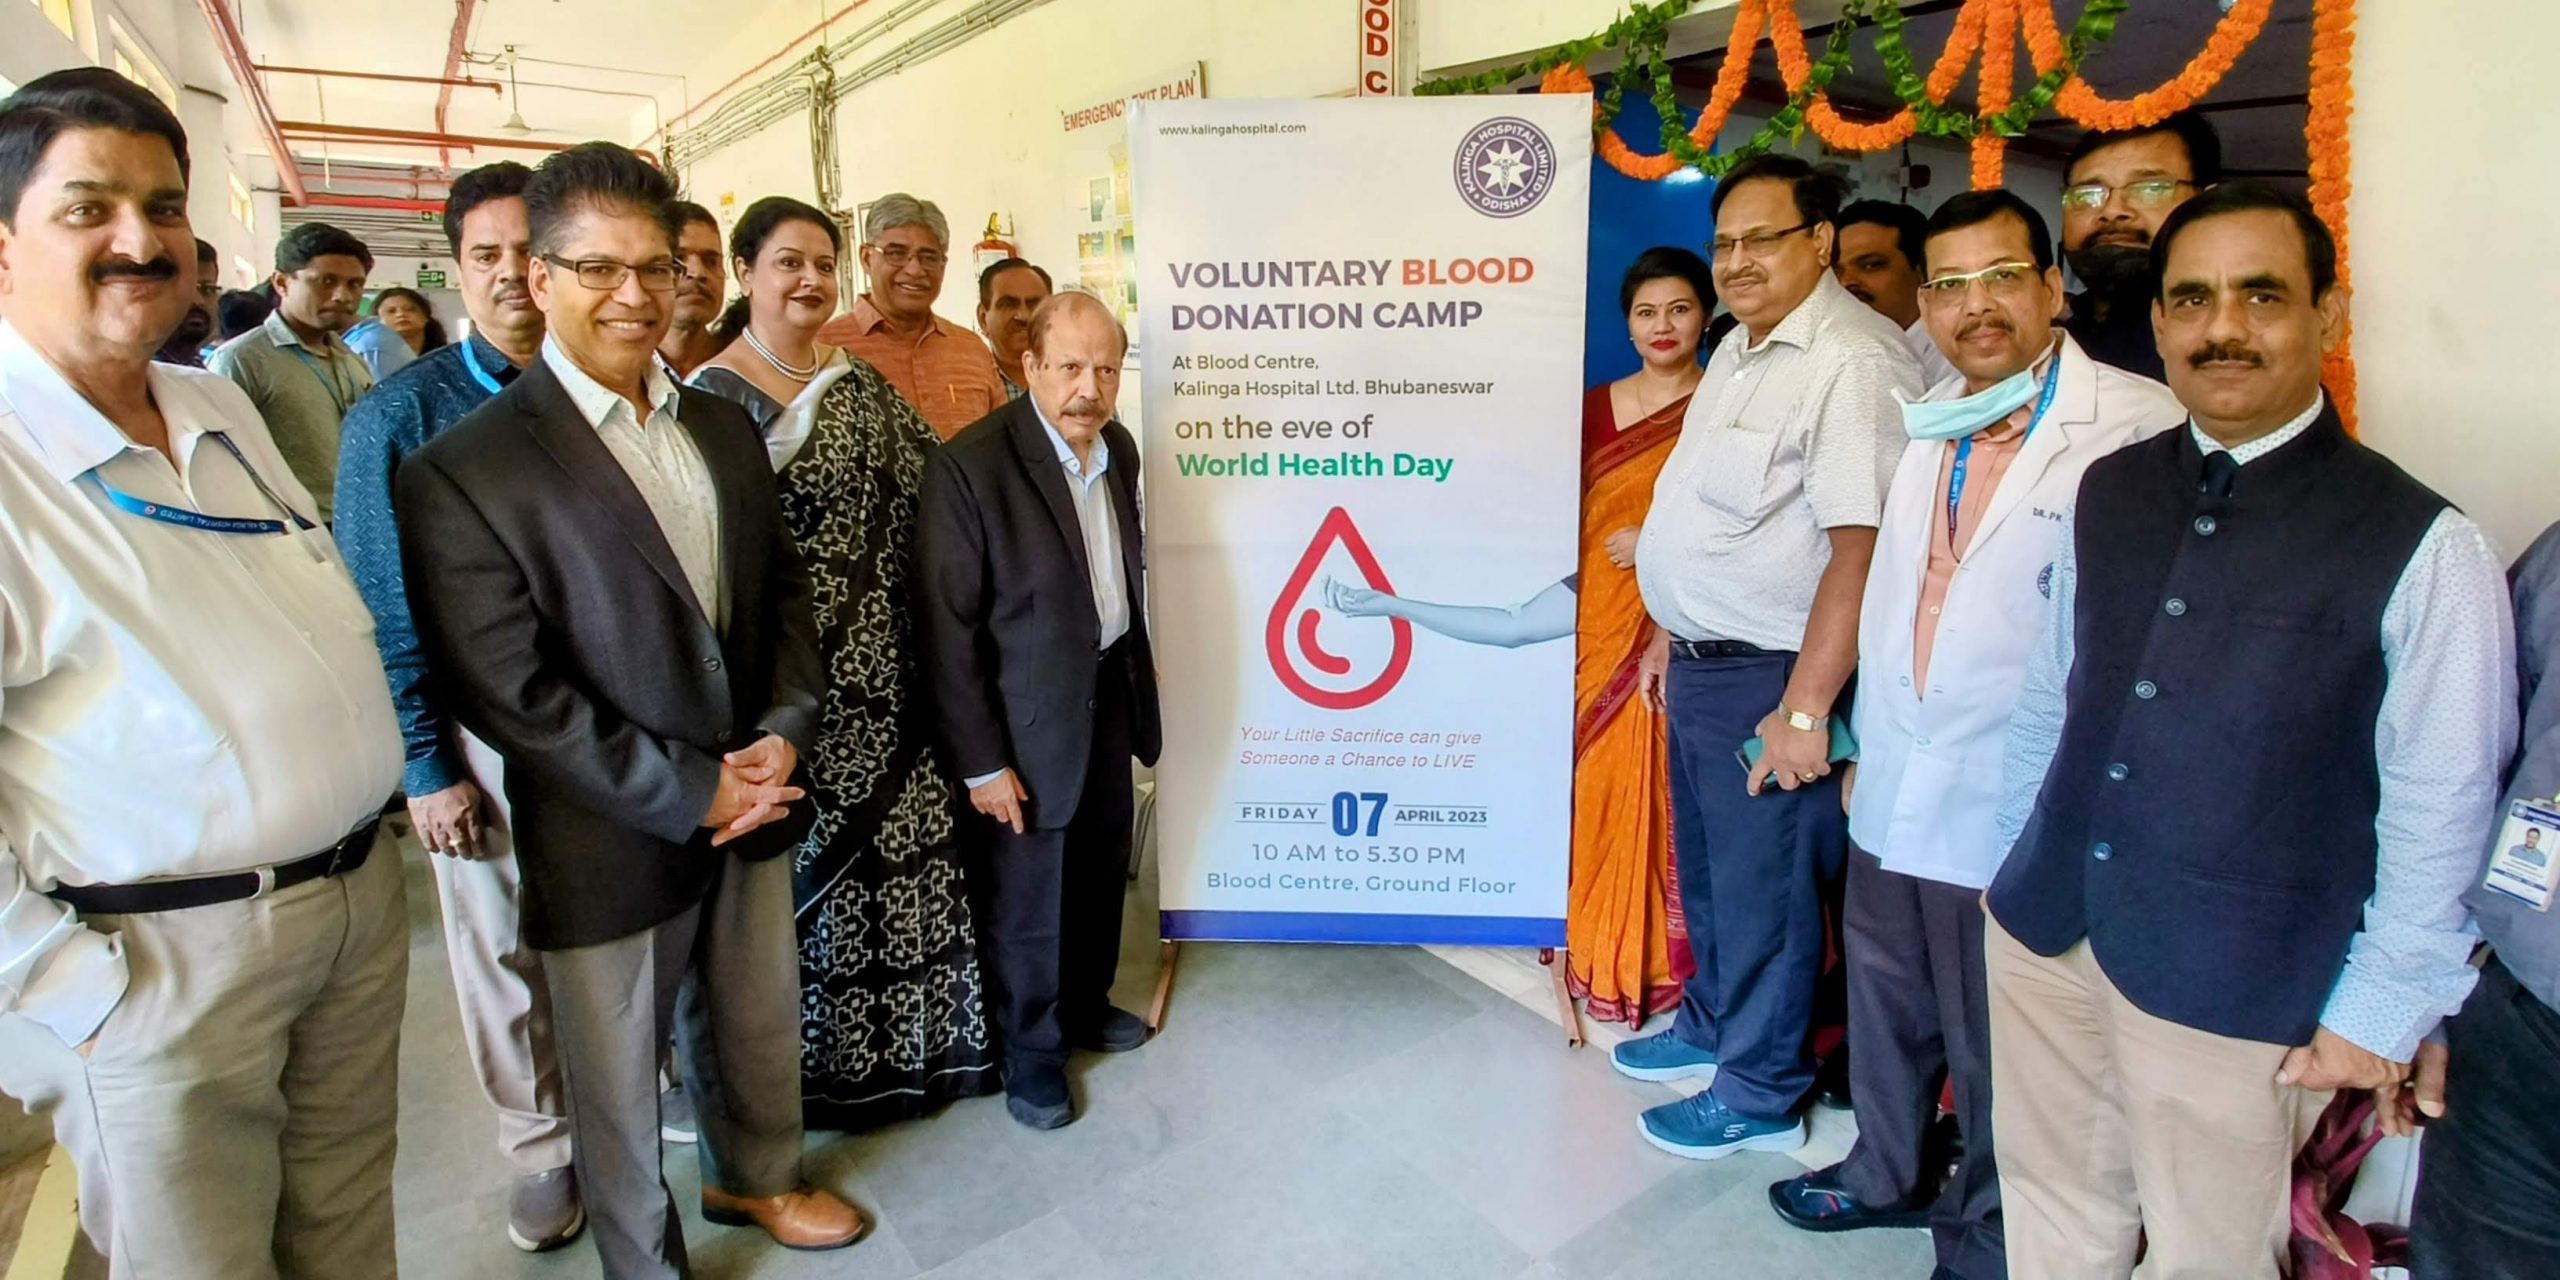 World Health Day observed with Blood Donation Camp and new Suite rooms inaugurated at KALINGA Hospital Ltd